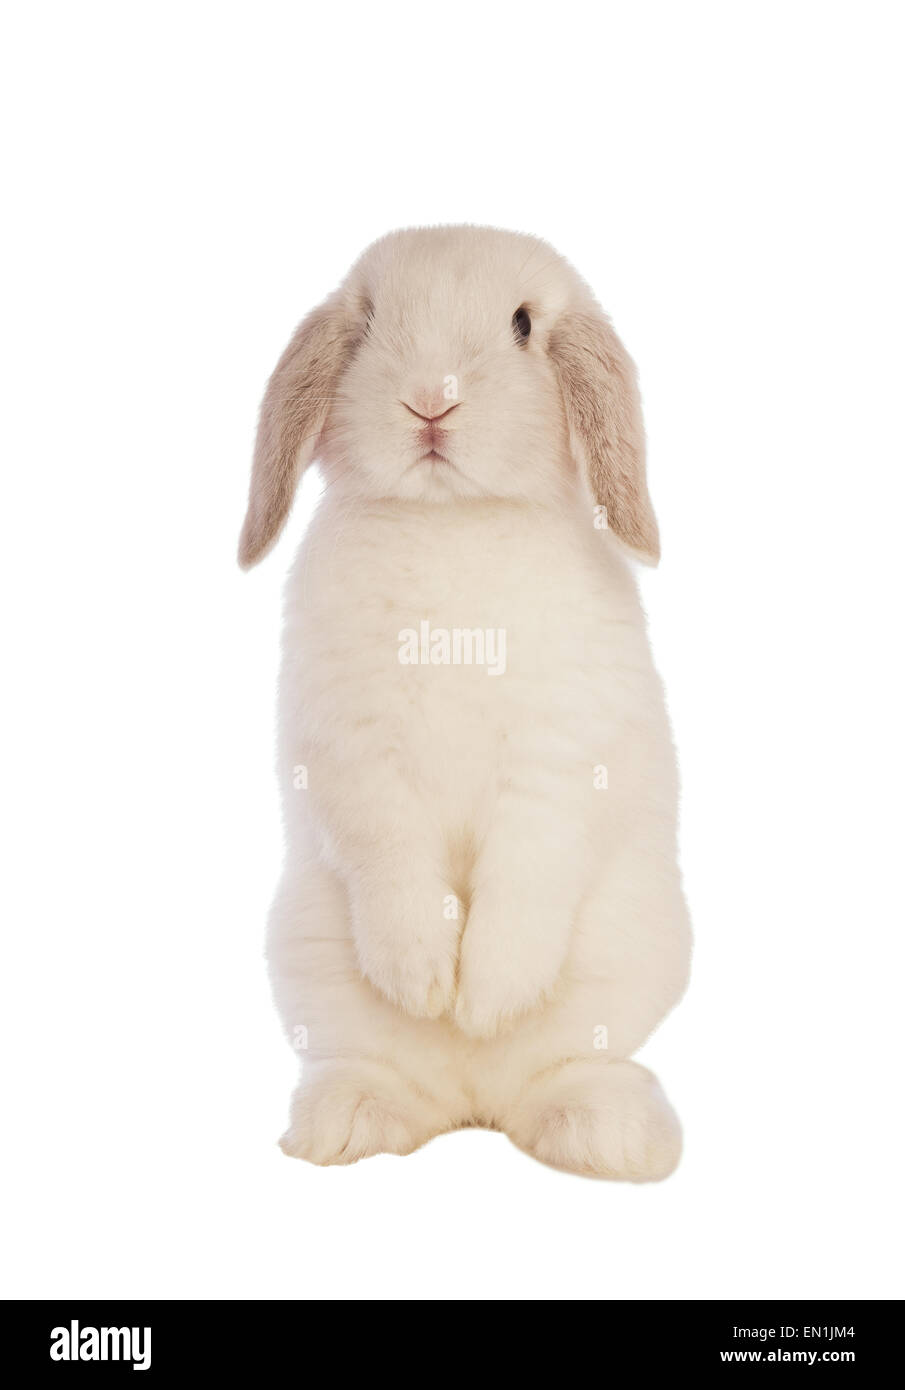 White Mini lop bunny rabbit standing up on back legs isolated on white background Stock Photo